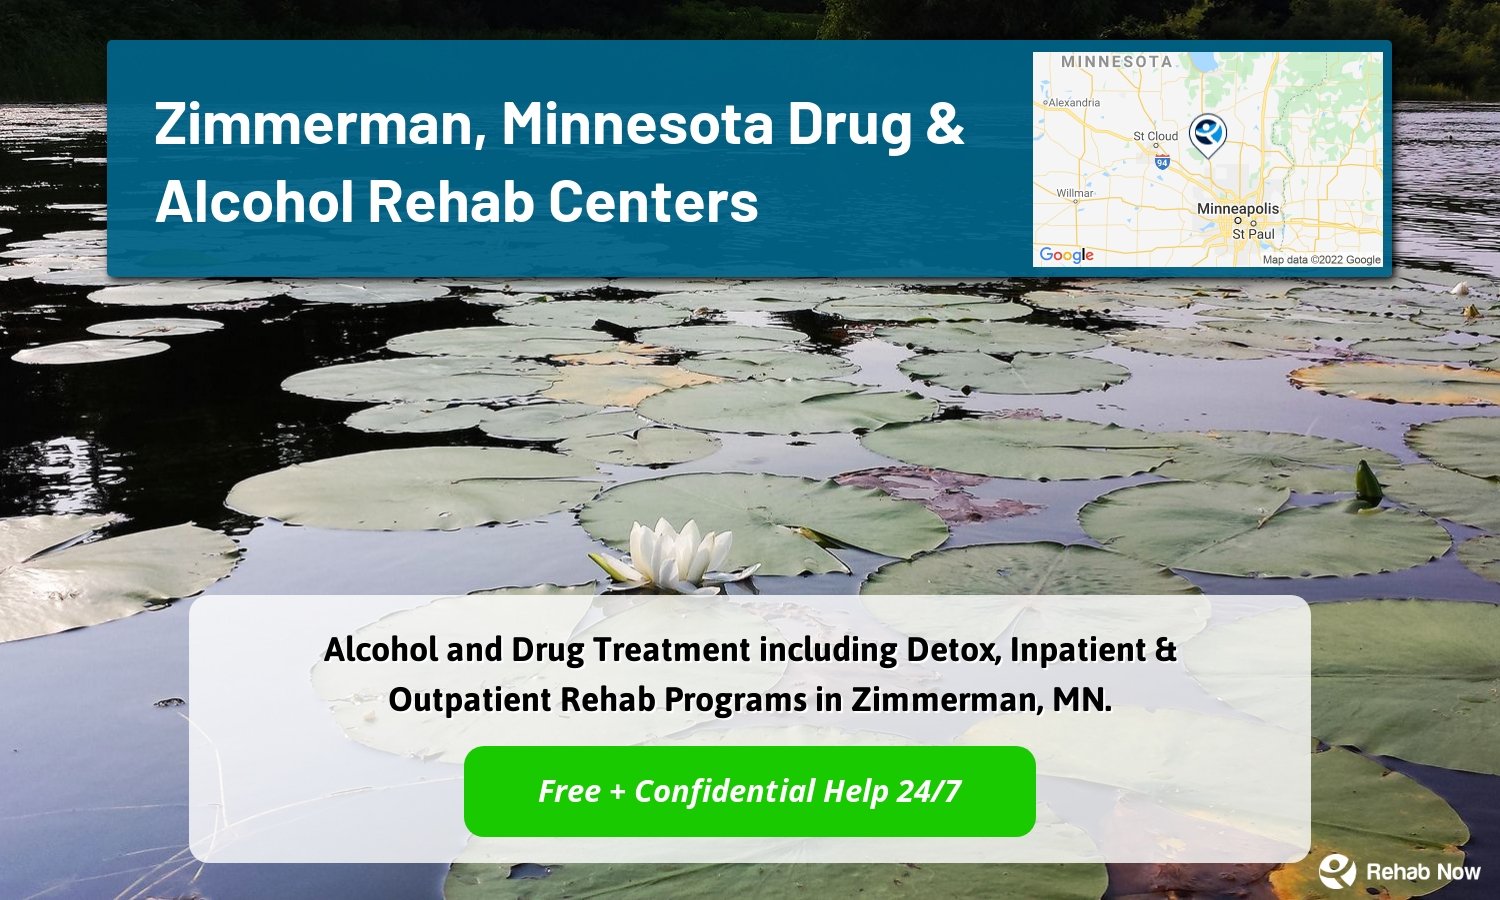 Alcohol and Drug Treatment including Detox, Inpatient & Outpatient Rehab Programs in Zimmerman, MN.